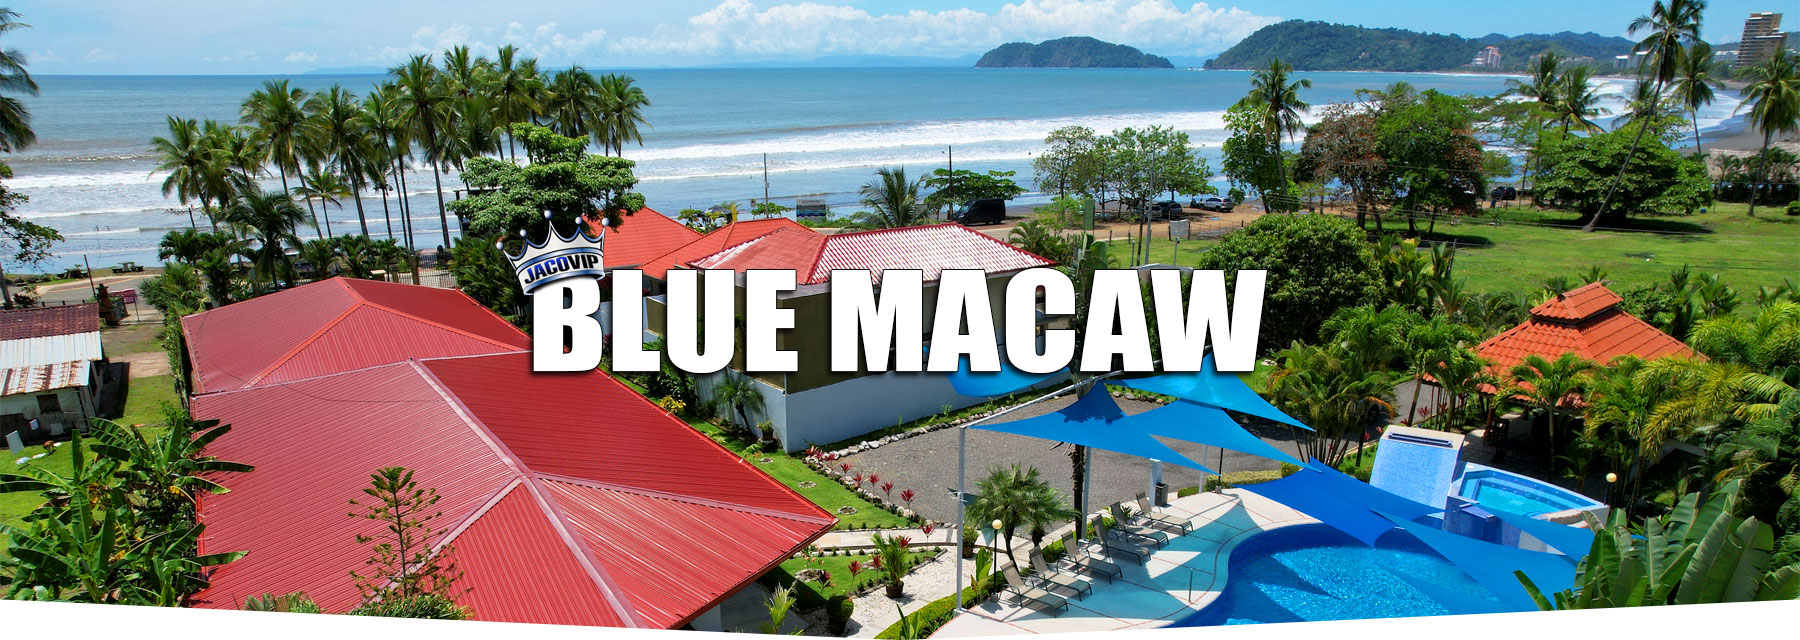 View of Blue Macaw vacation villas in Jaco Costa Rica